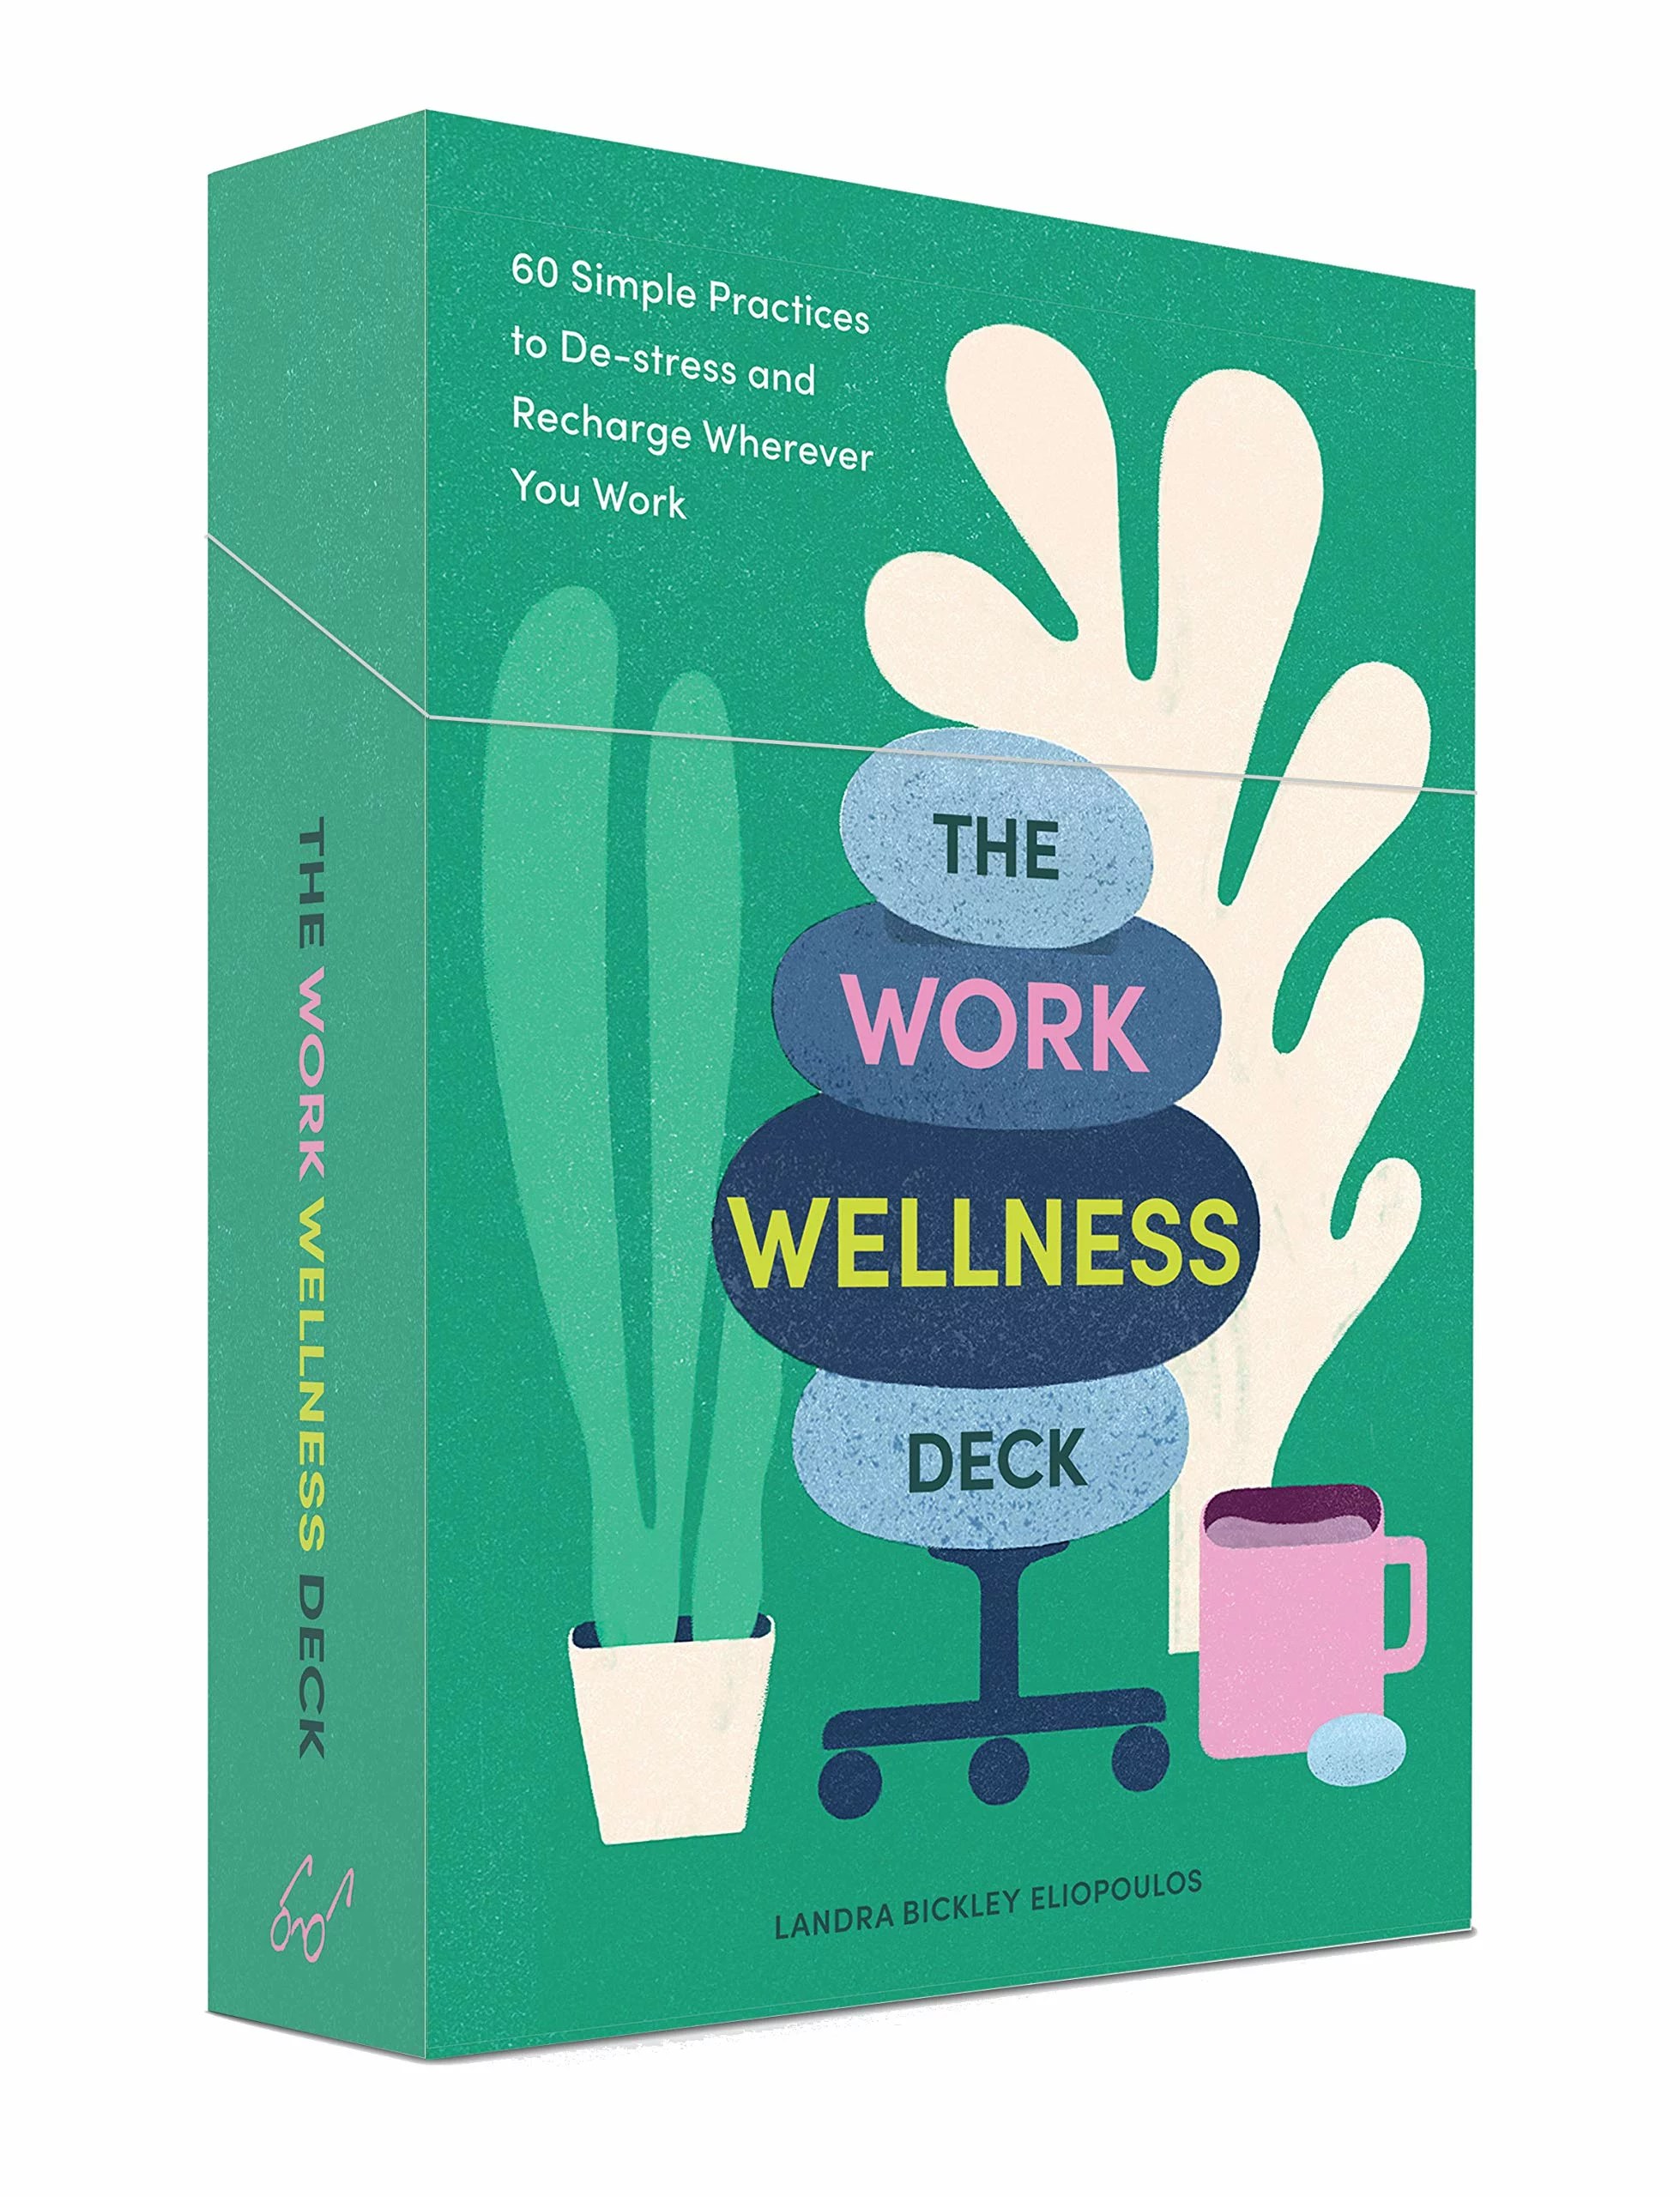 25 Wellness Gifts For People Who Work From Home